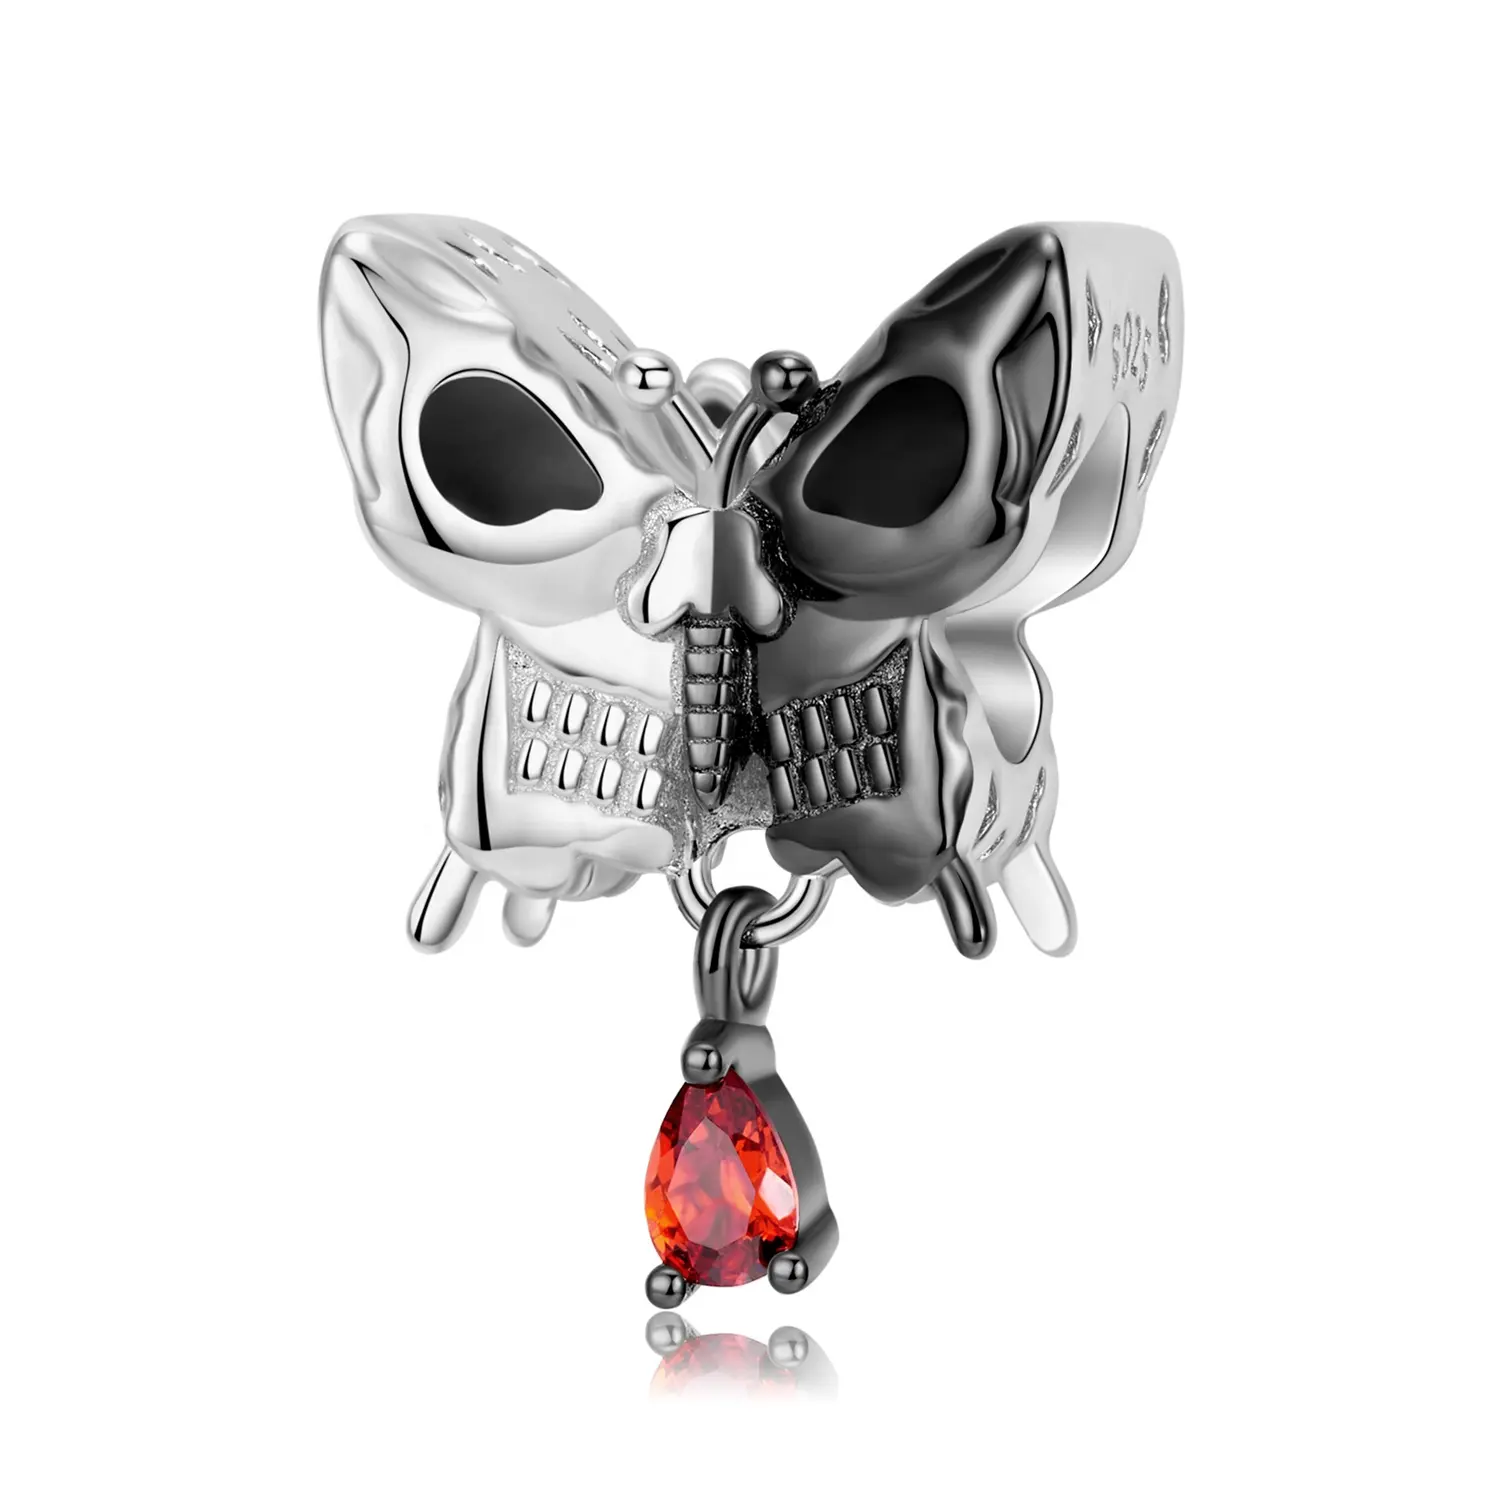 Smiley Skull Butterfly Charm Perle mit Red CZ Real 925 Sterling Silber für Original Armband Frauen Schmuck Making Drops hipping